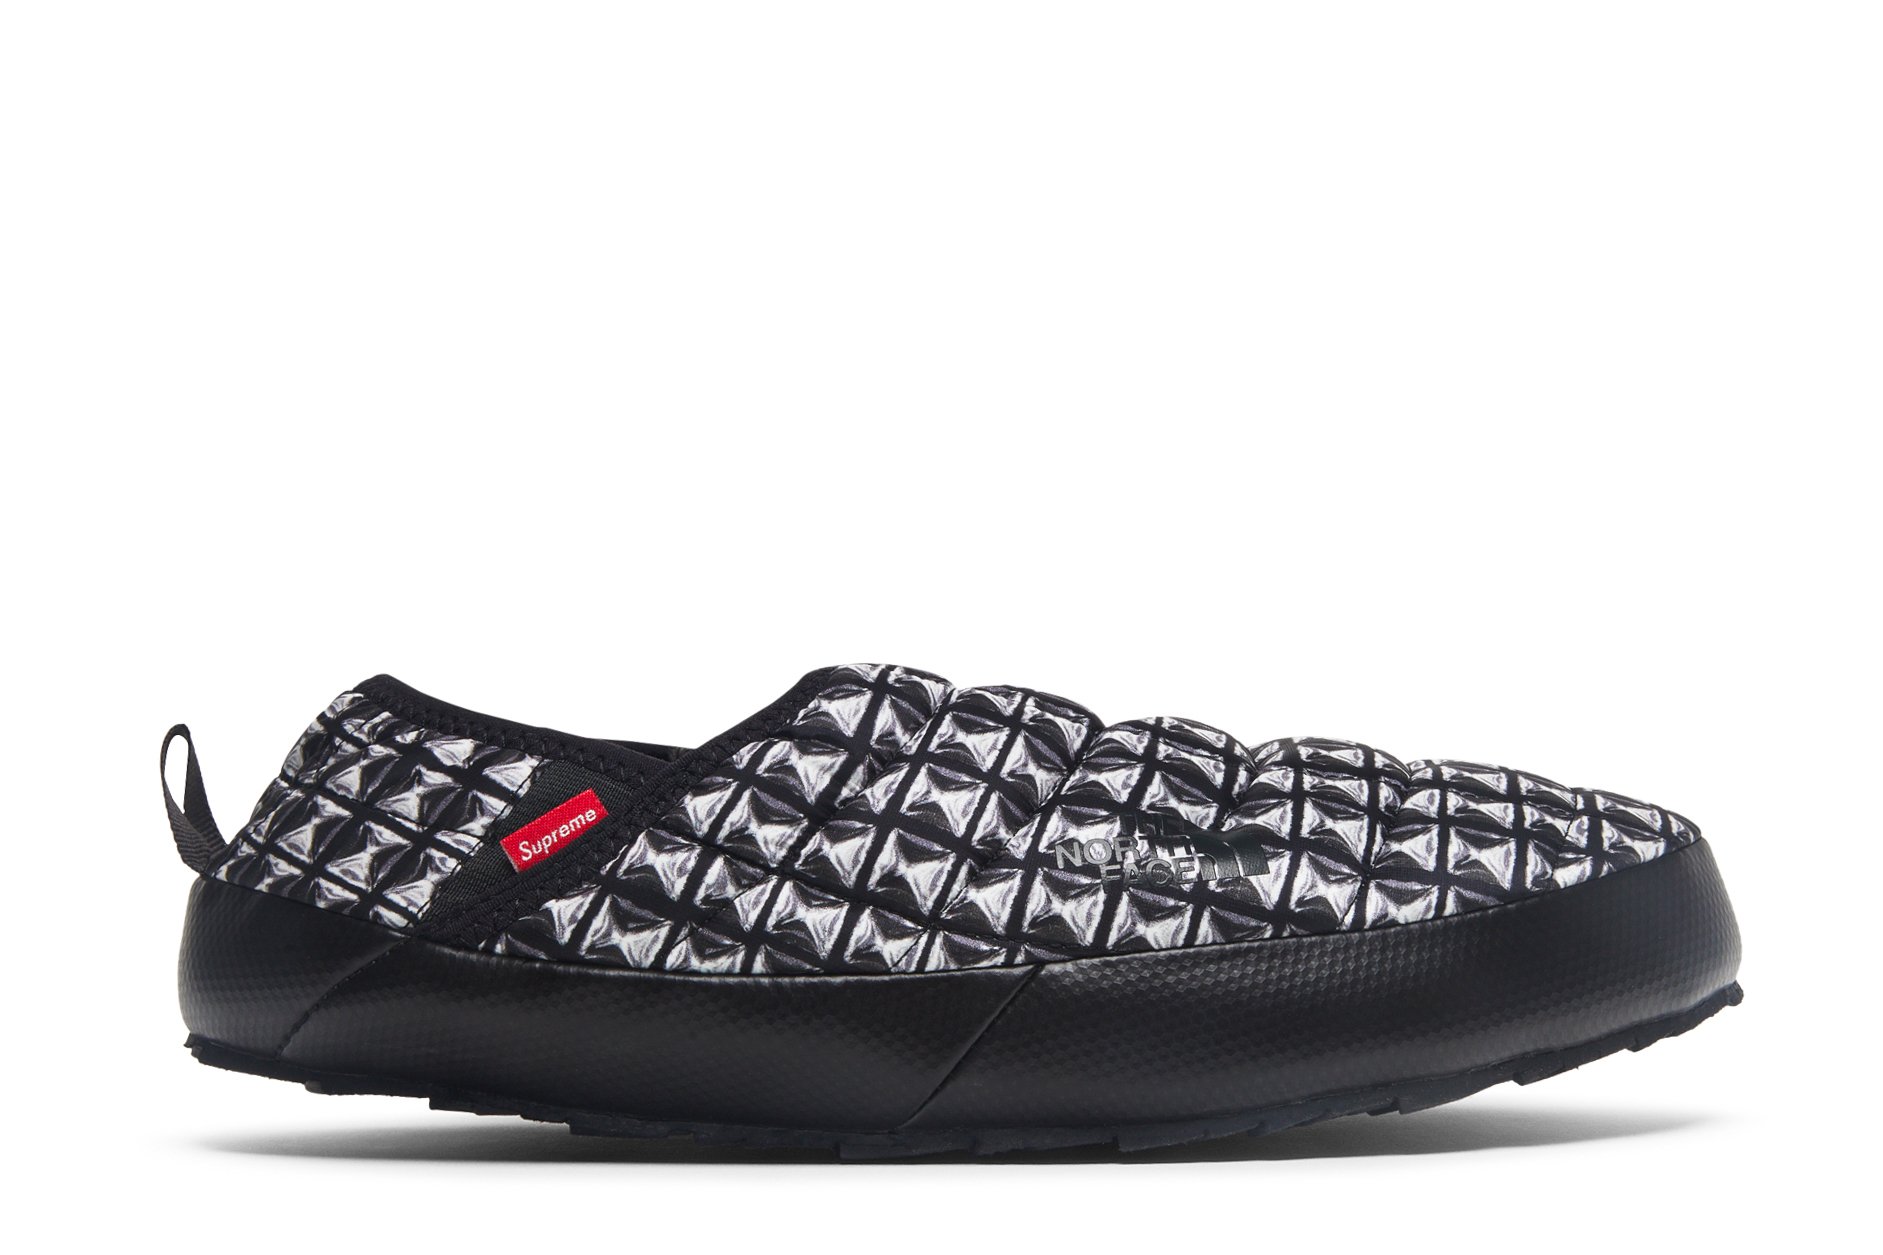 Supreme North Face Studded Traction Mule